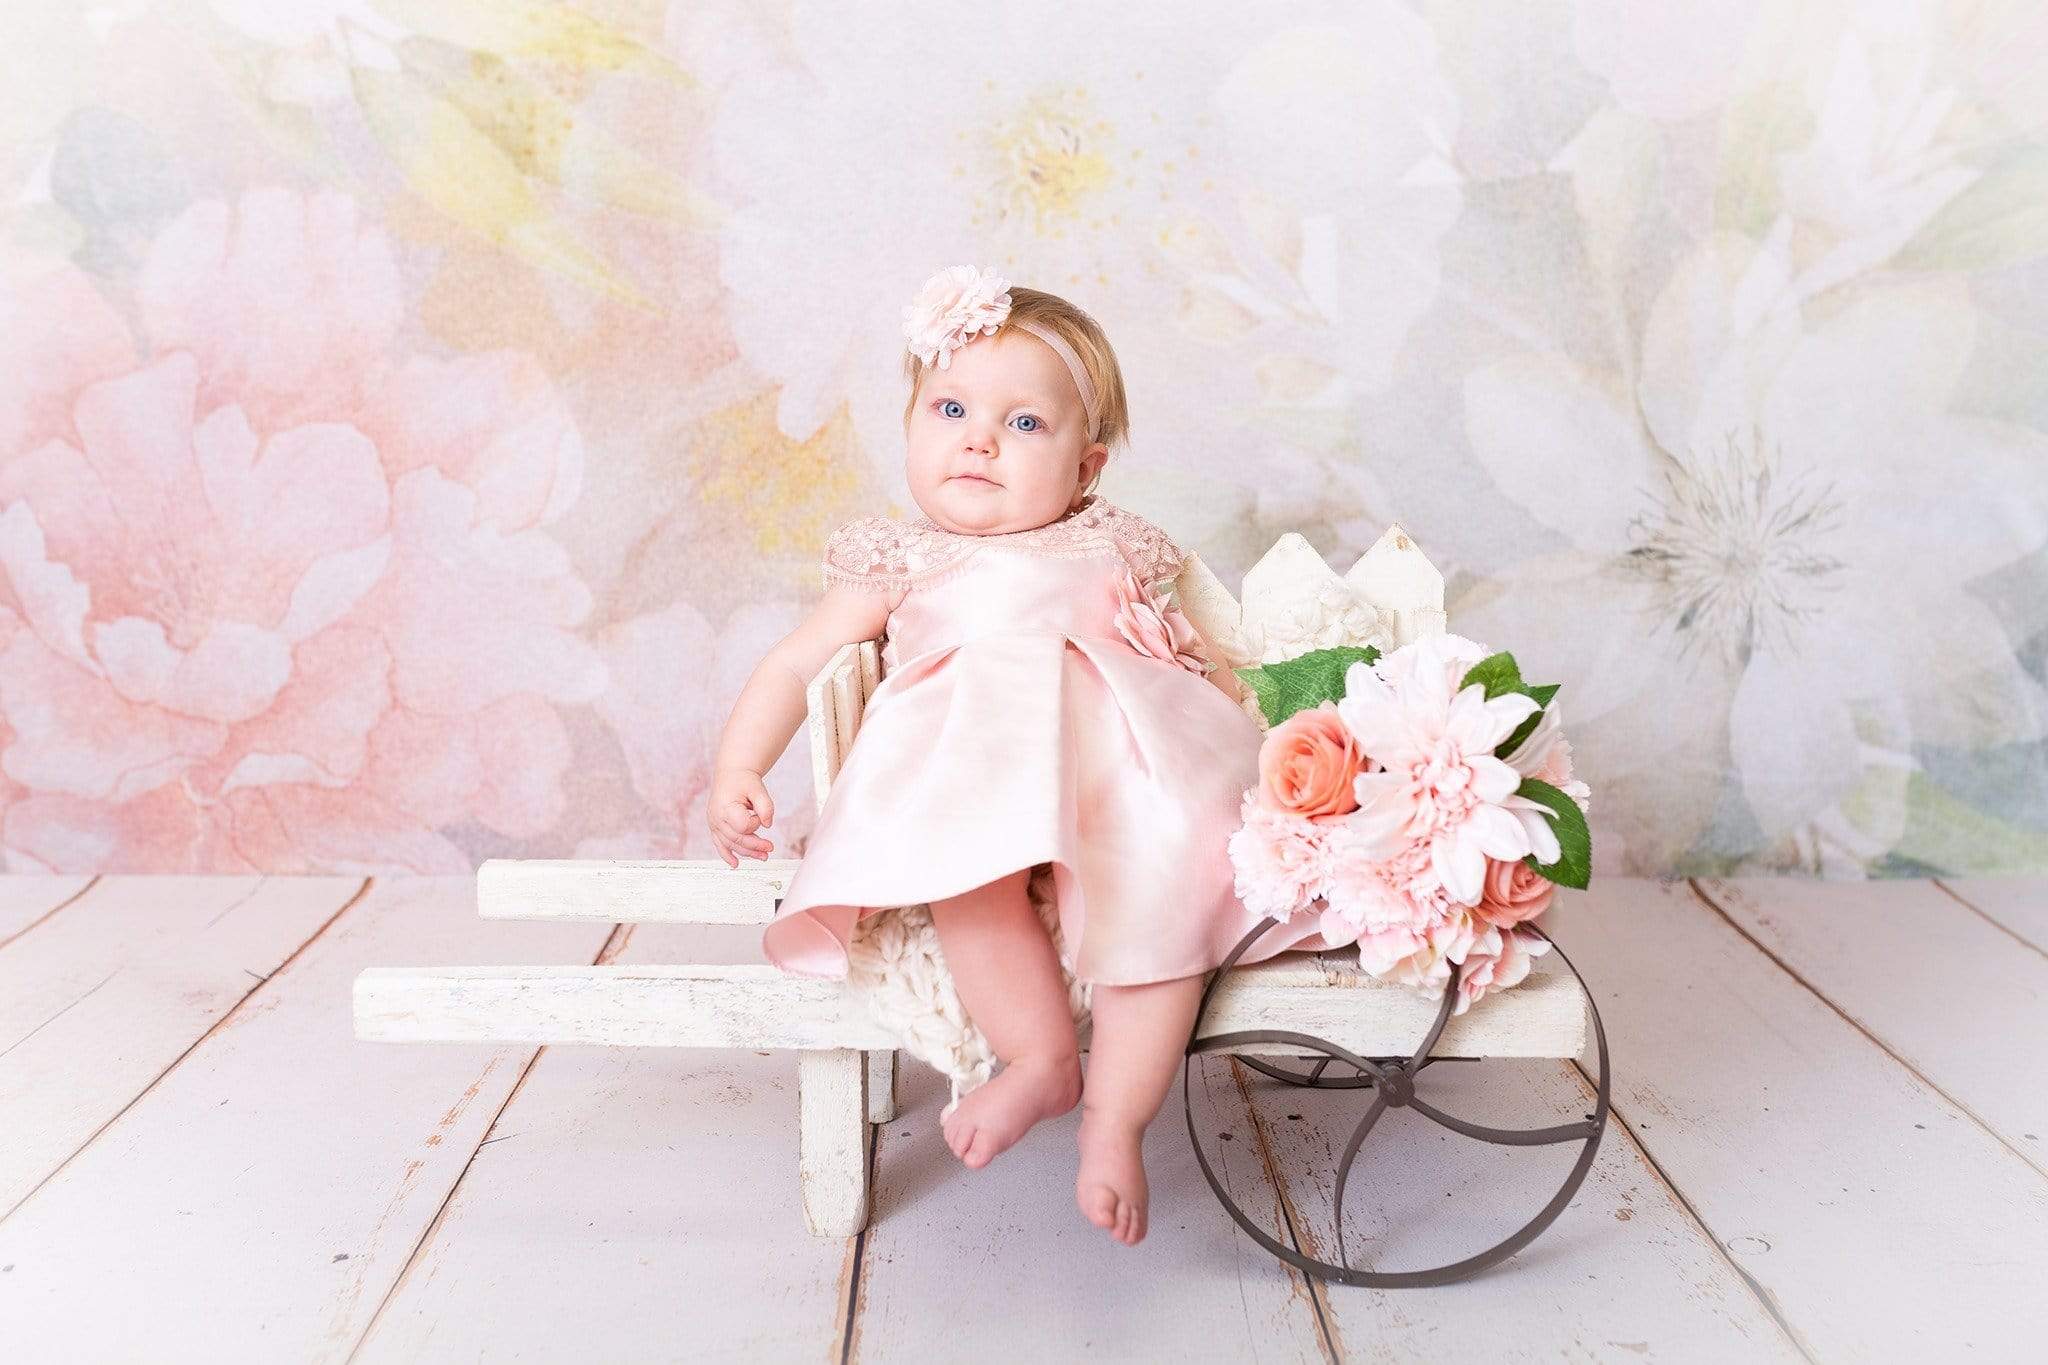 Kate Flowers Pastel Florals Backdrop for Photography Designed by Amanda Moffatt